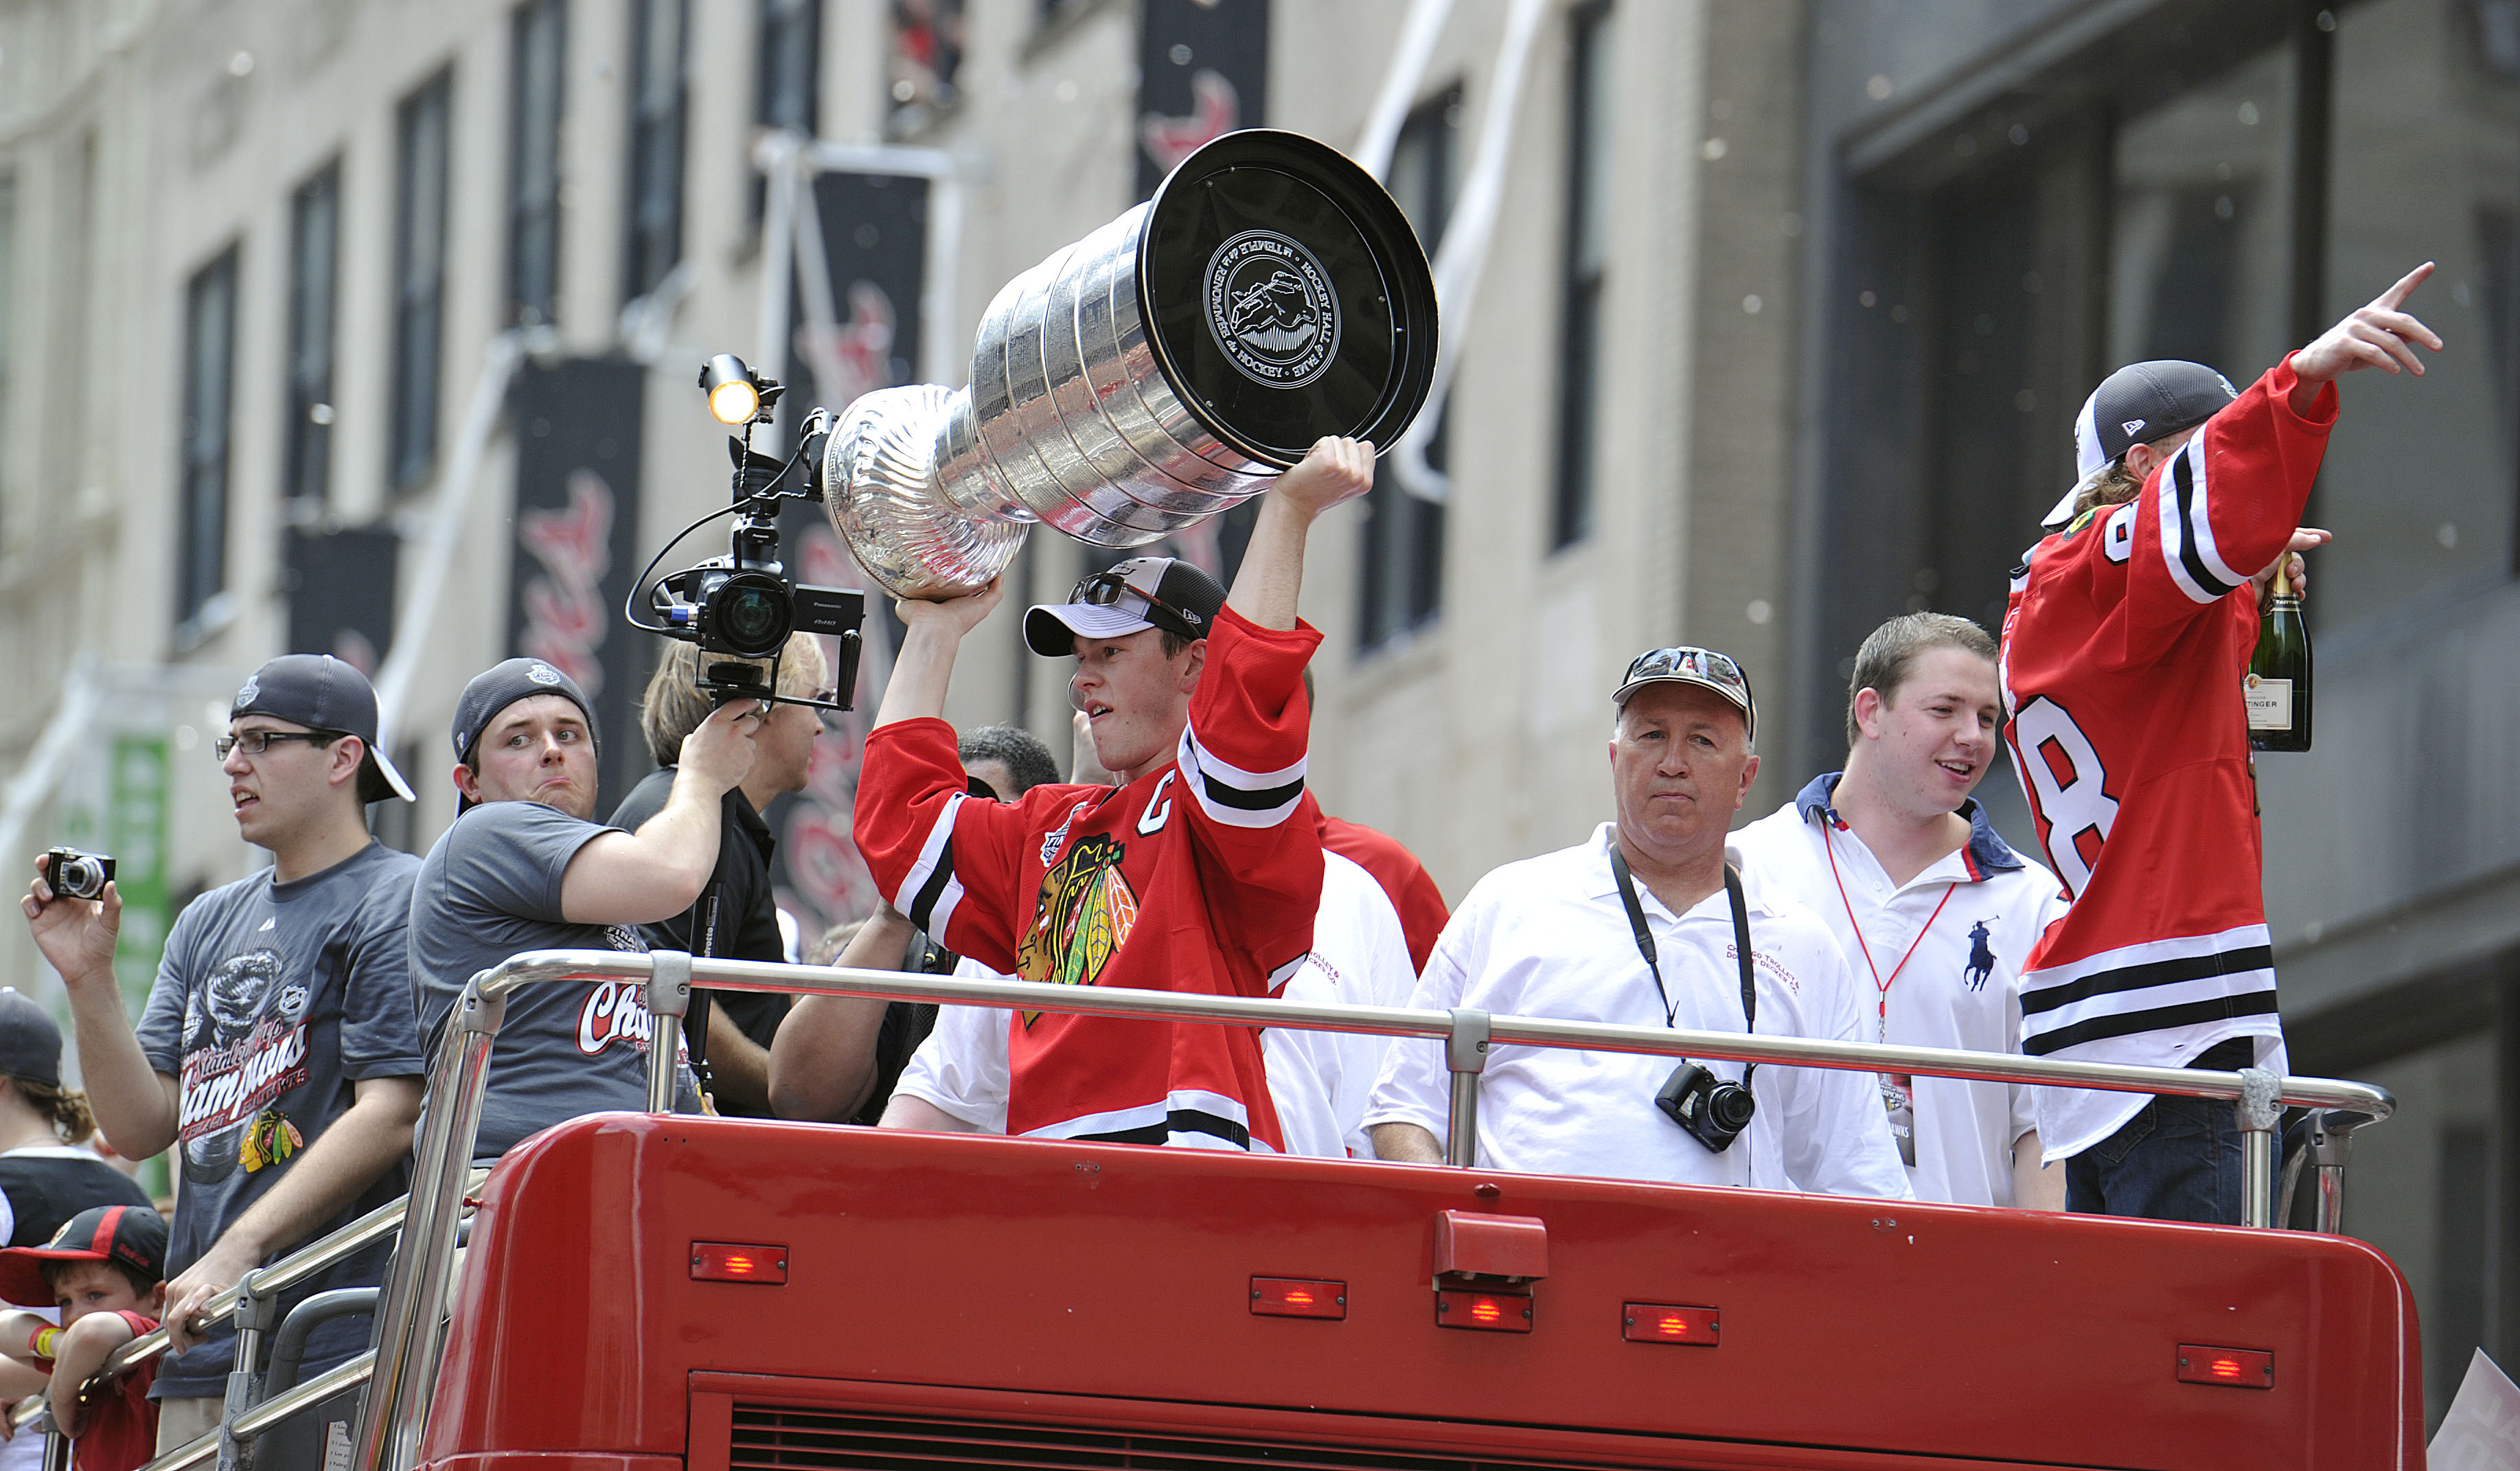 CHICAGO - JUNE 11: Jonathan Toews of the Chicago Blackhawks (L) holds up the Stanley Cup as his teammate, Patrick Kane (R), waves to fans during the Chicago Blackhawks victory parade on June 11, 2010 in Chicago, Illinois. (Photo by Jim Prisching/Getty Ima